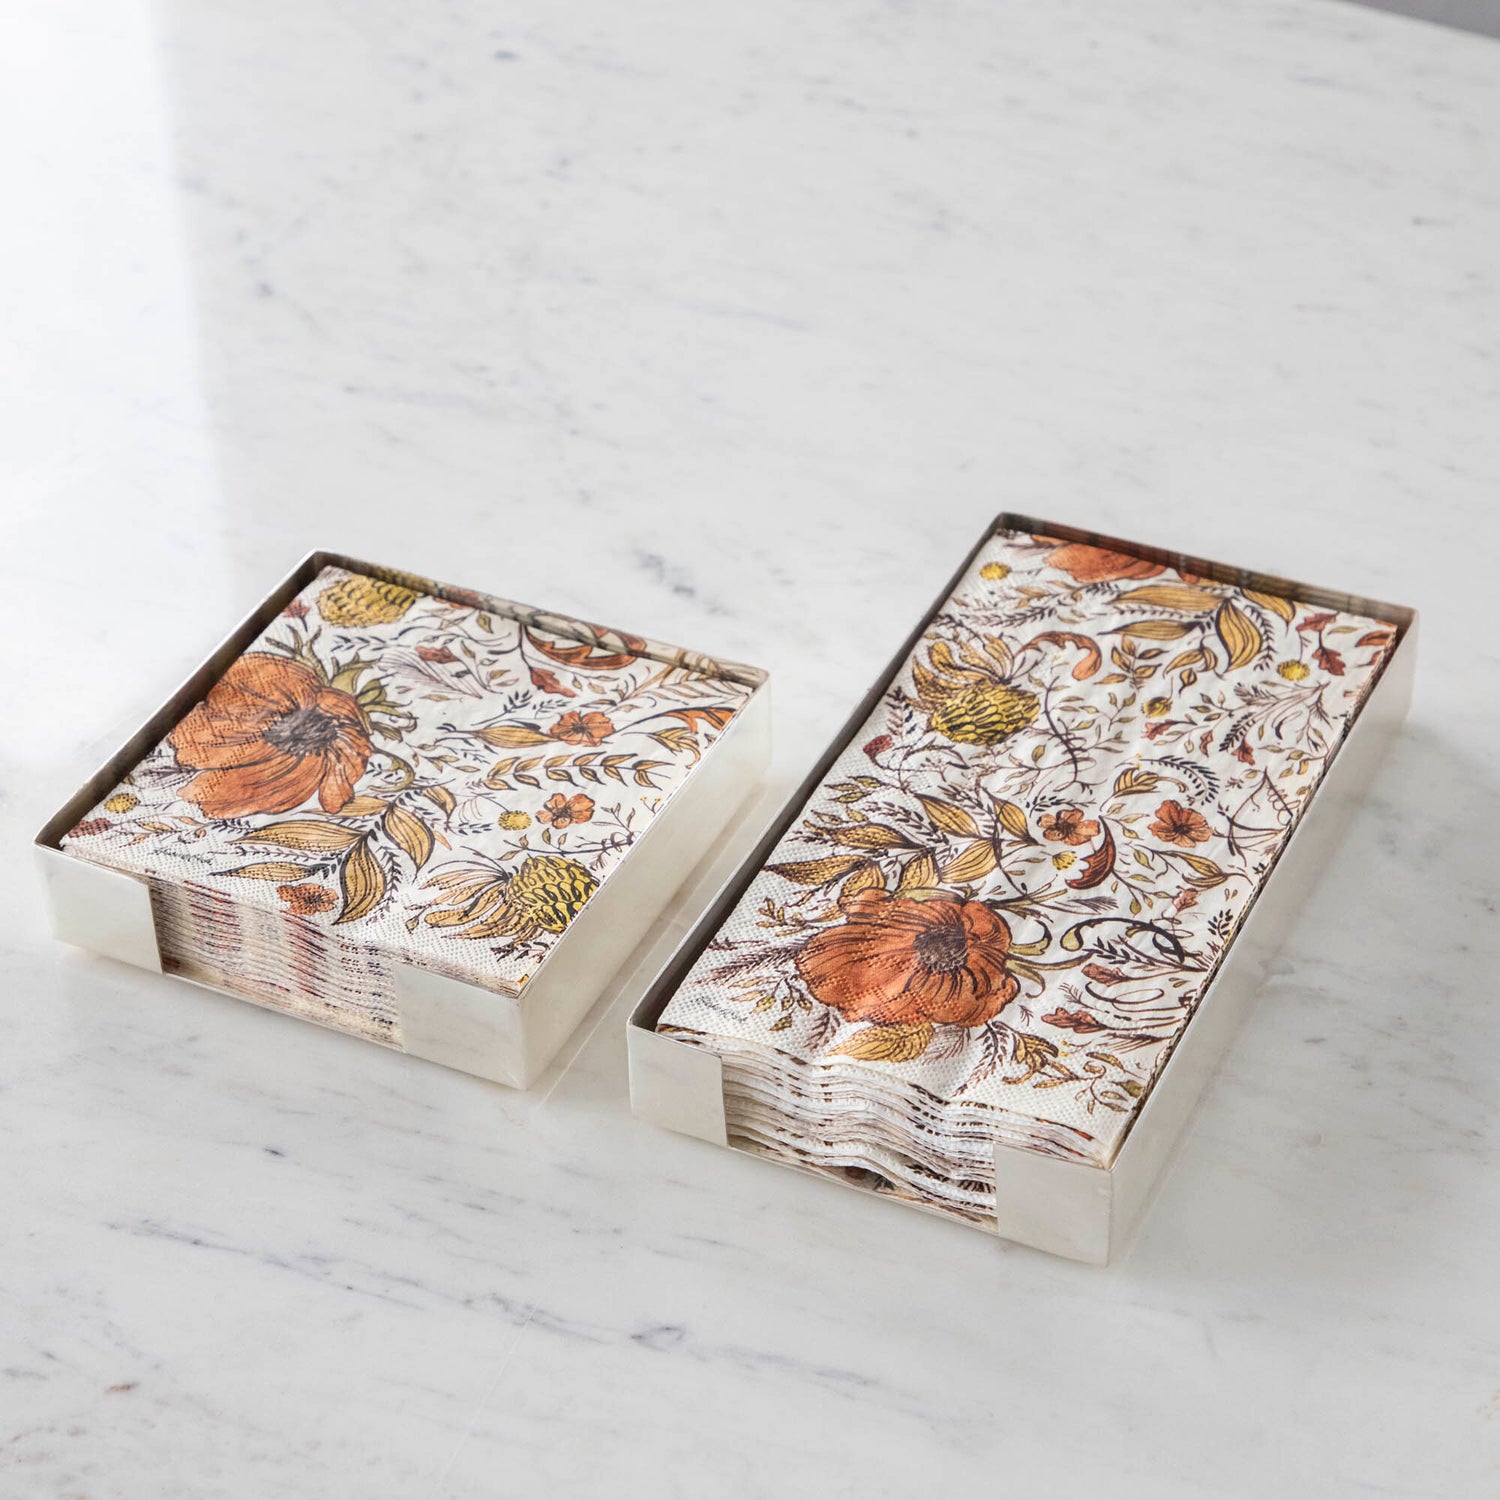 Two Silver Napkin Holders, guest-sized and cocktail-sized, containing autumnal napkins on a white table.